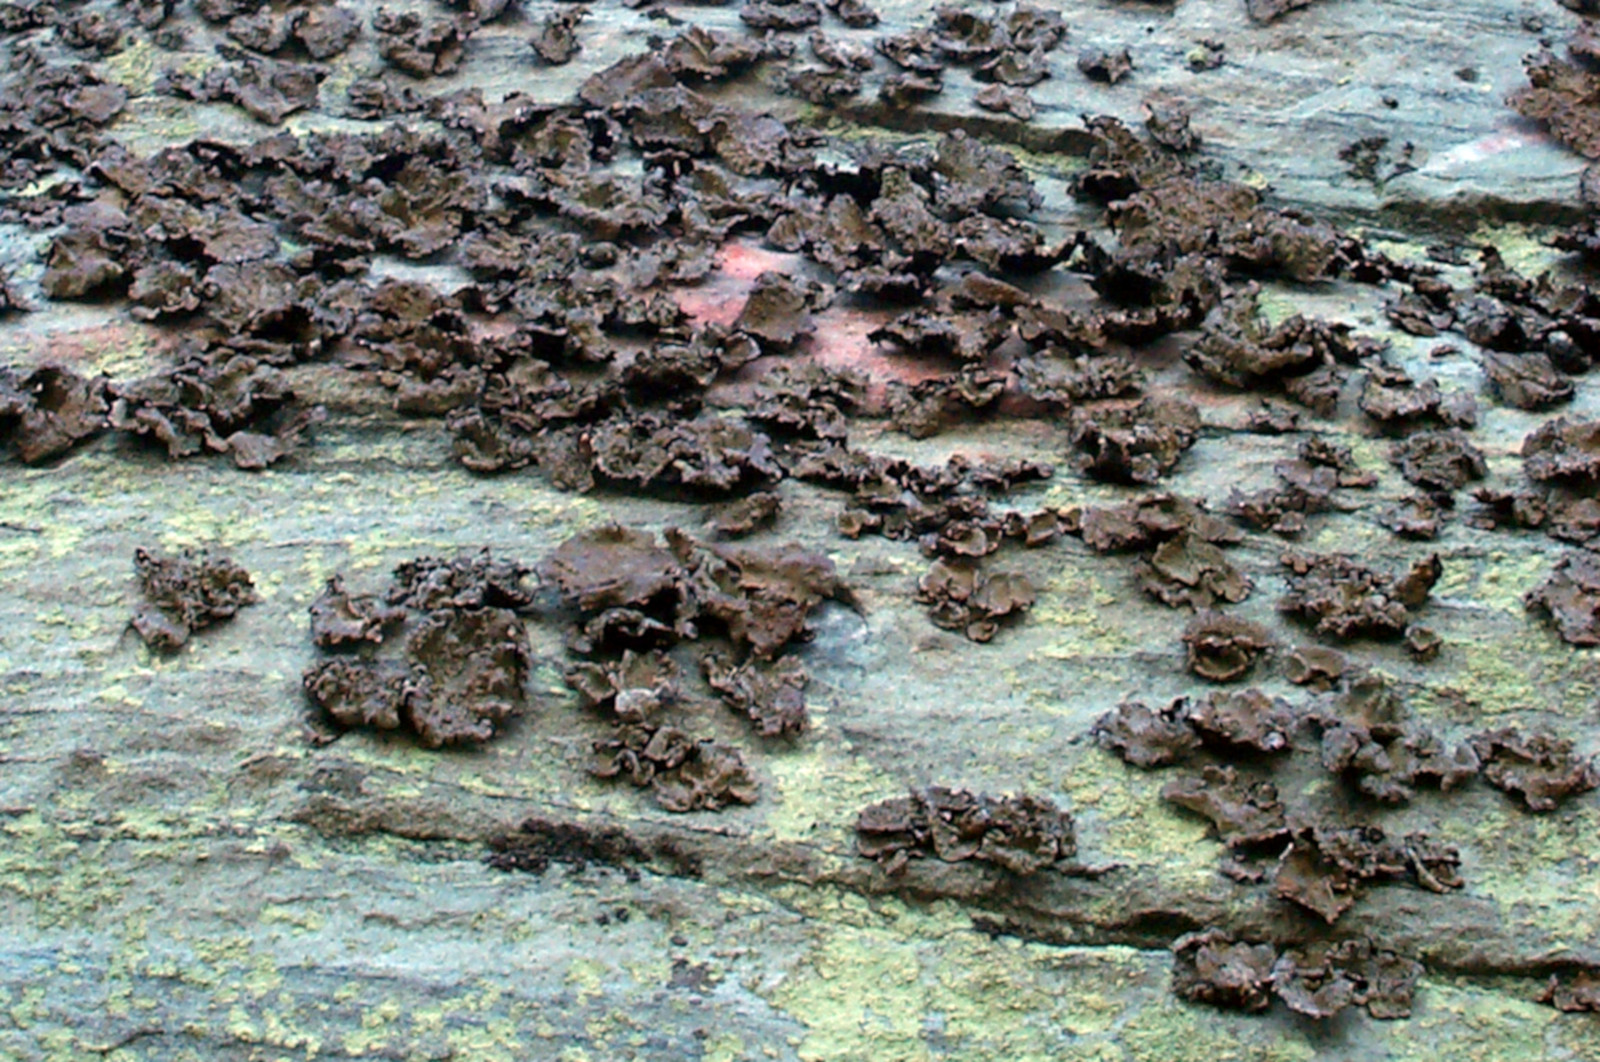 neat close-up of some lichens